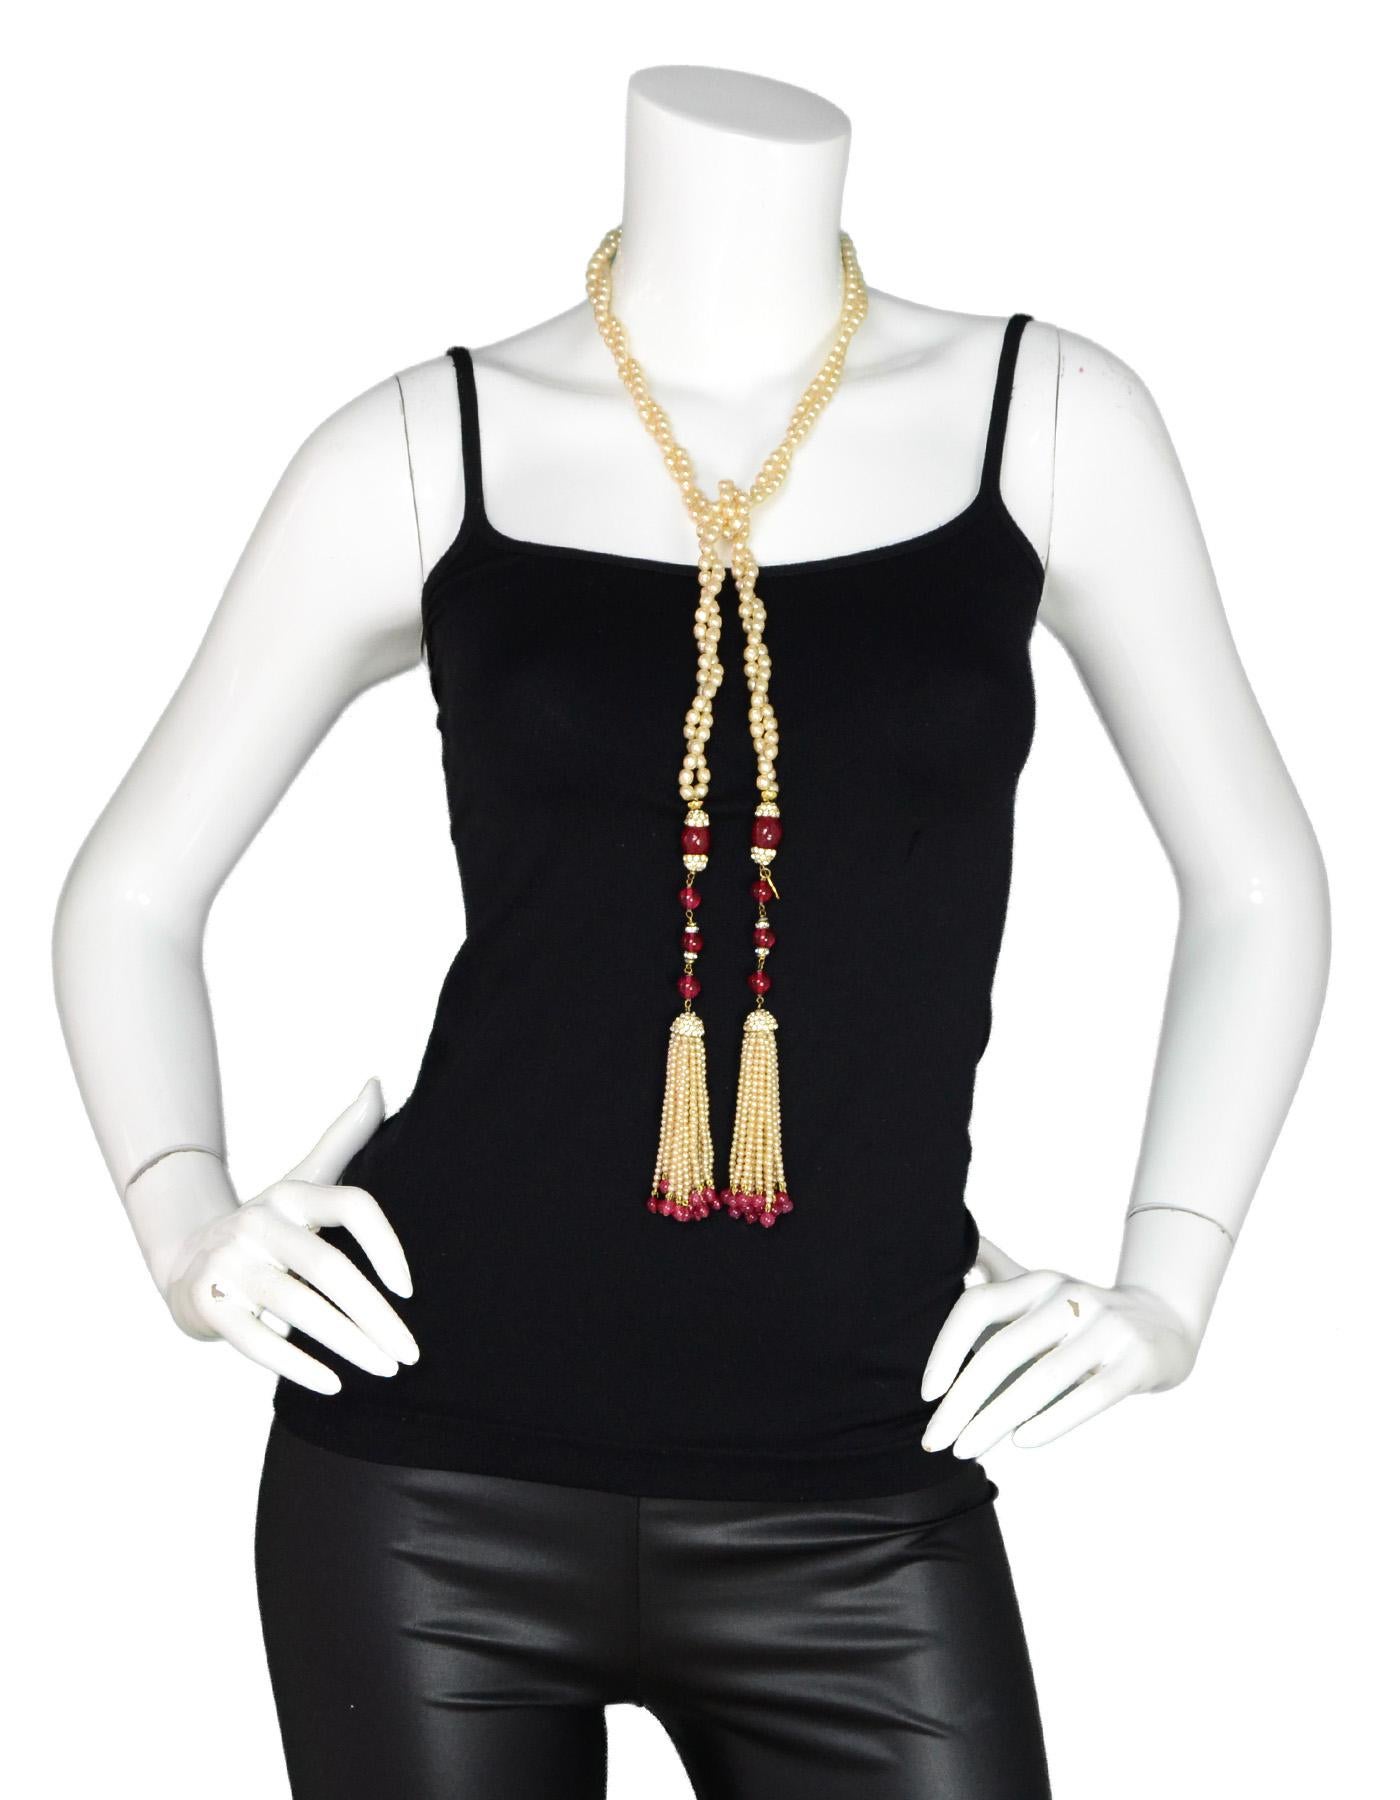 Chanel 1983 Vintage Double Strand Faux Pearl/Strass Crystal Lariant Necklace W/ Tassels

Made in: France
Year of Production: 1983
Color: Red, white, goldtone
Materials: Goldtone metal, crystals, faux stones and faux pearls
Closure: Wrap/drape